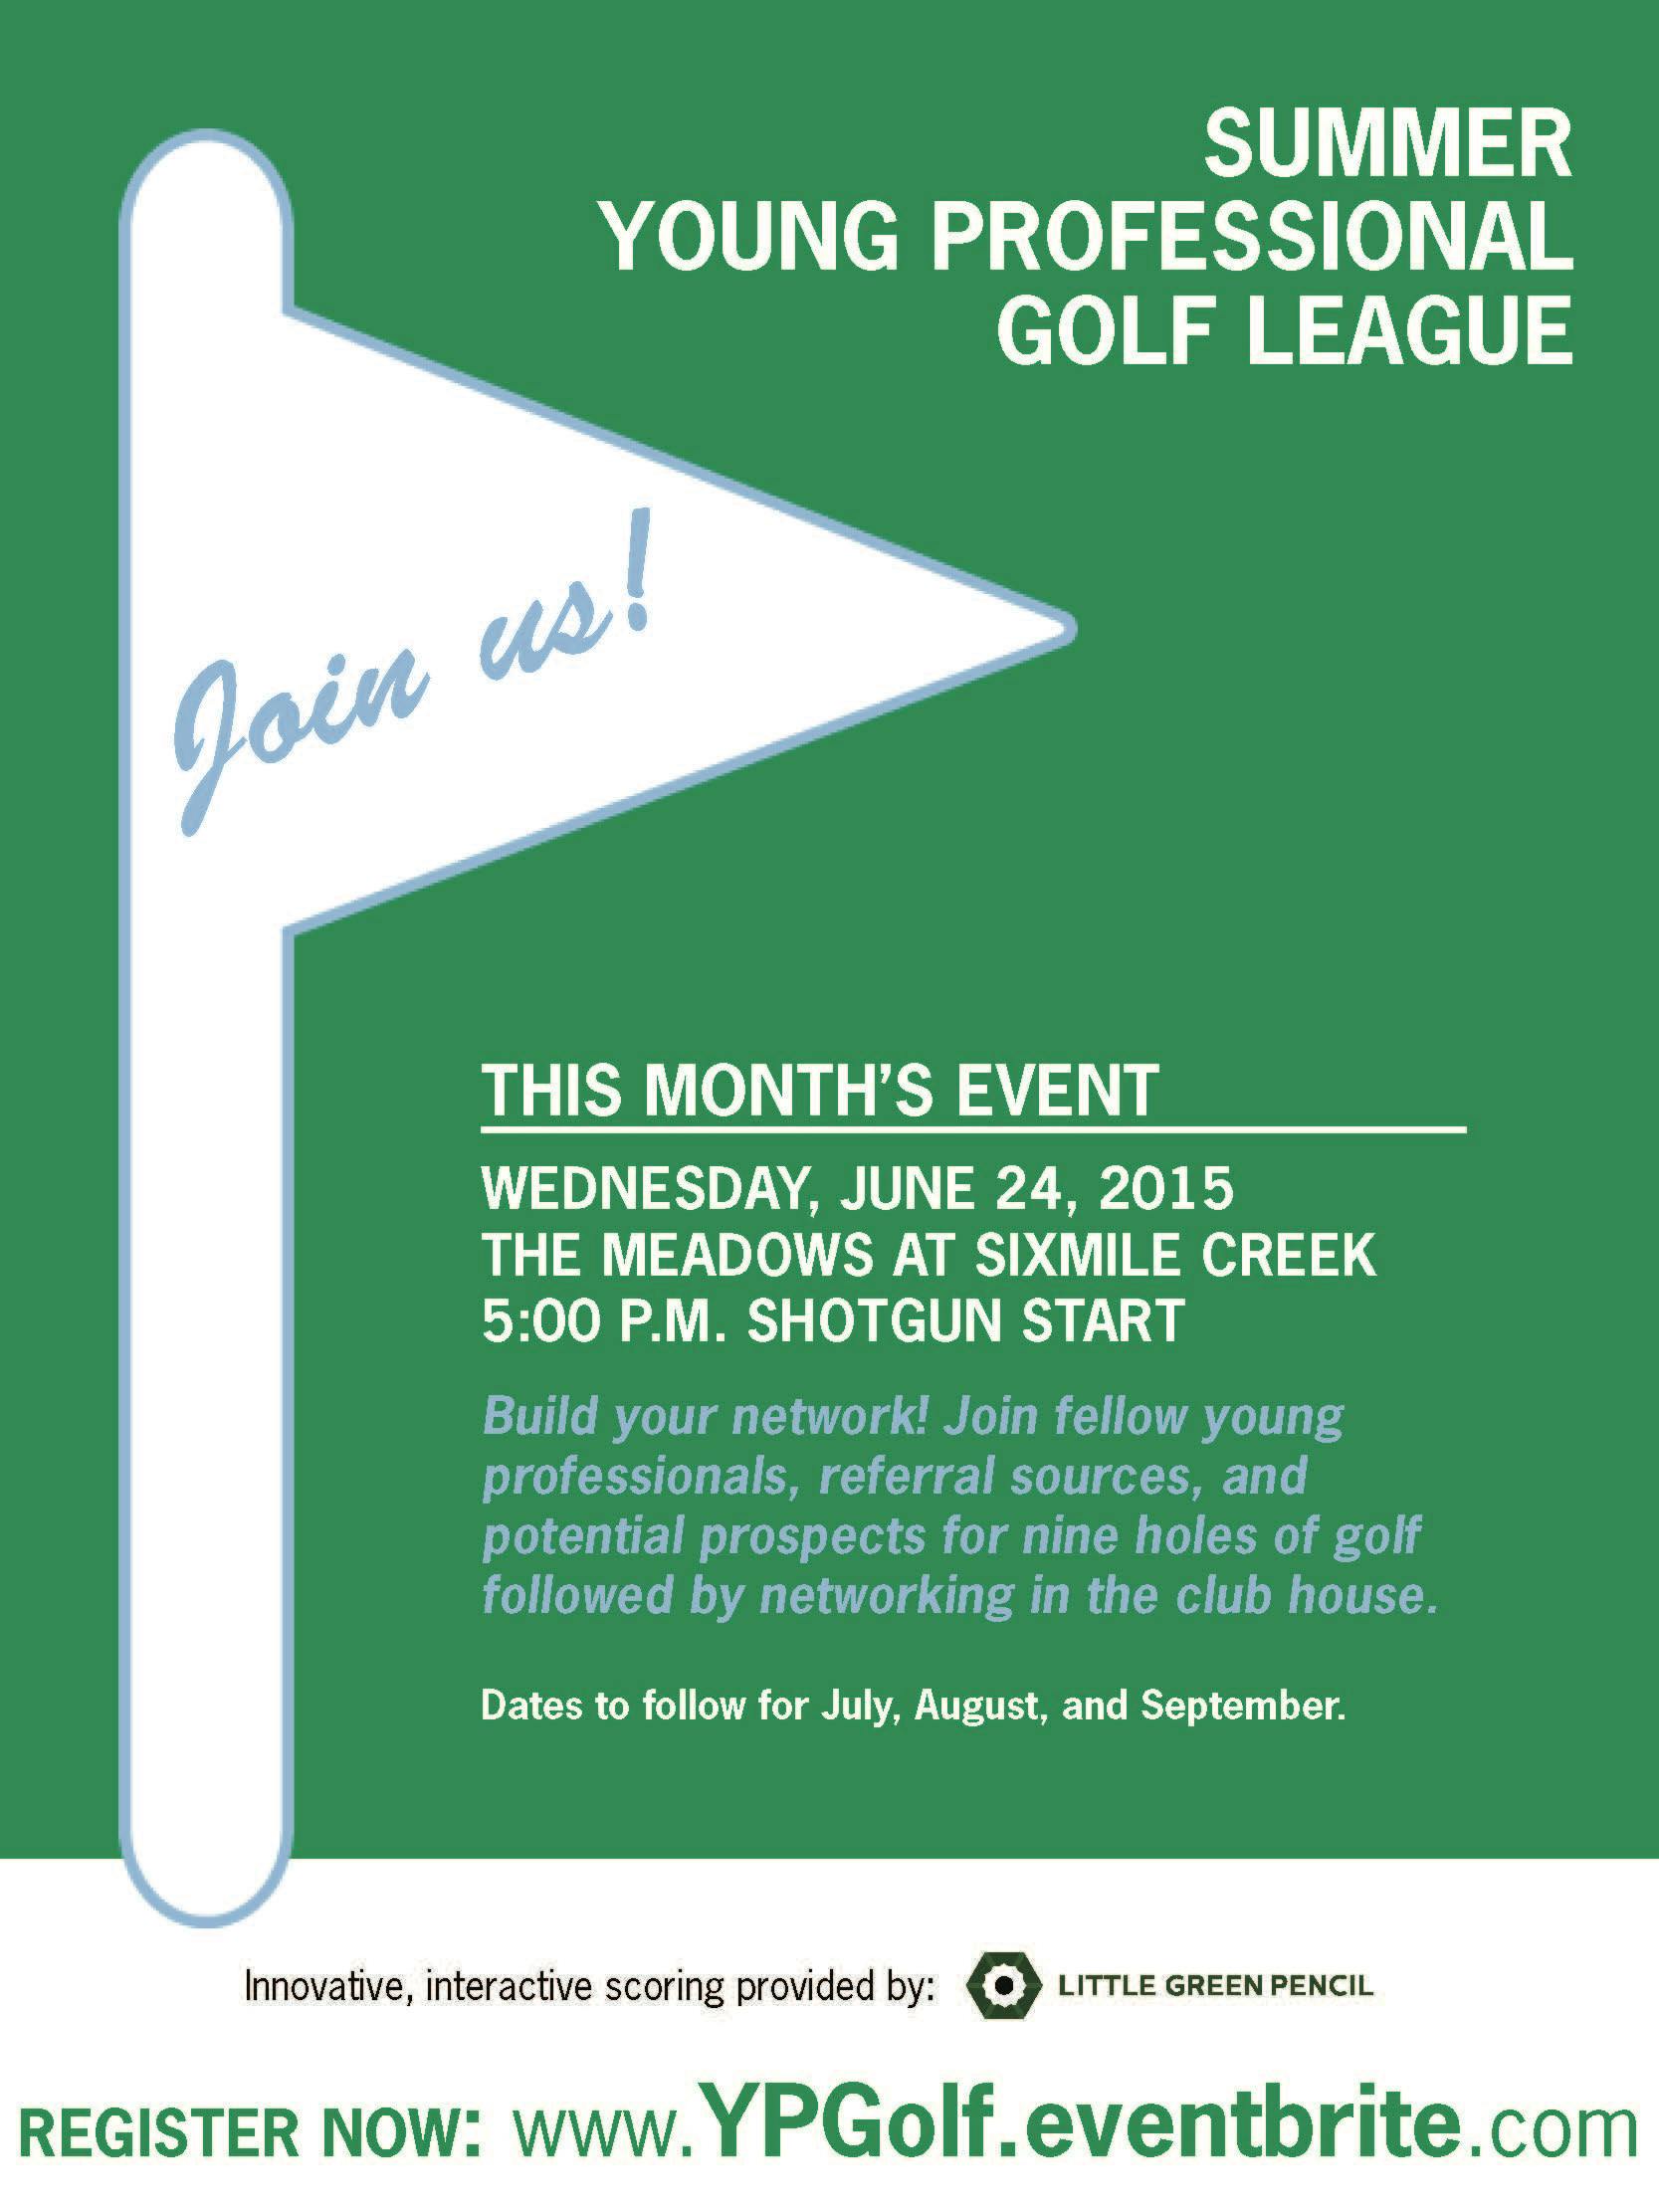 2019 Summer Young Professional Golf League